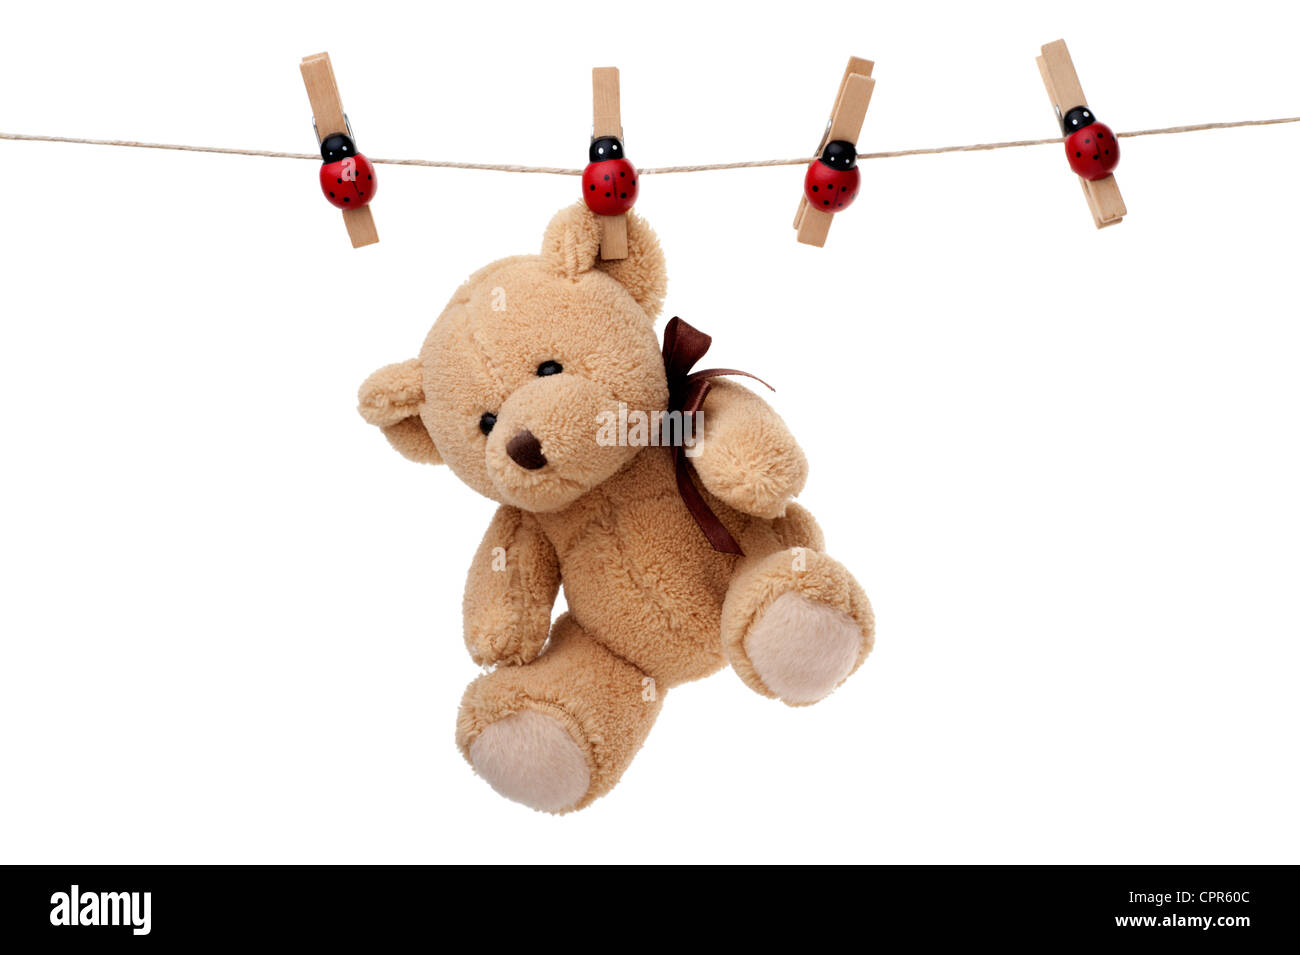 Small teddy bear hanging on clothesline, isolated on white background Stock Photo